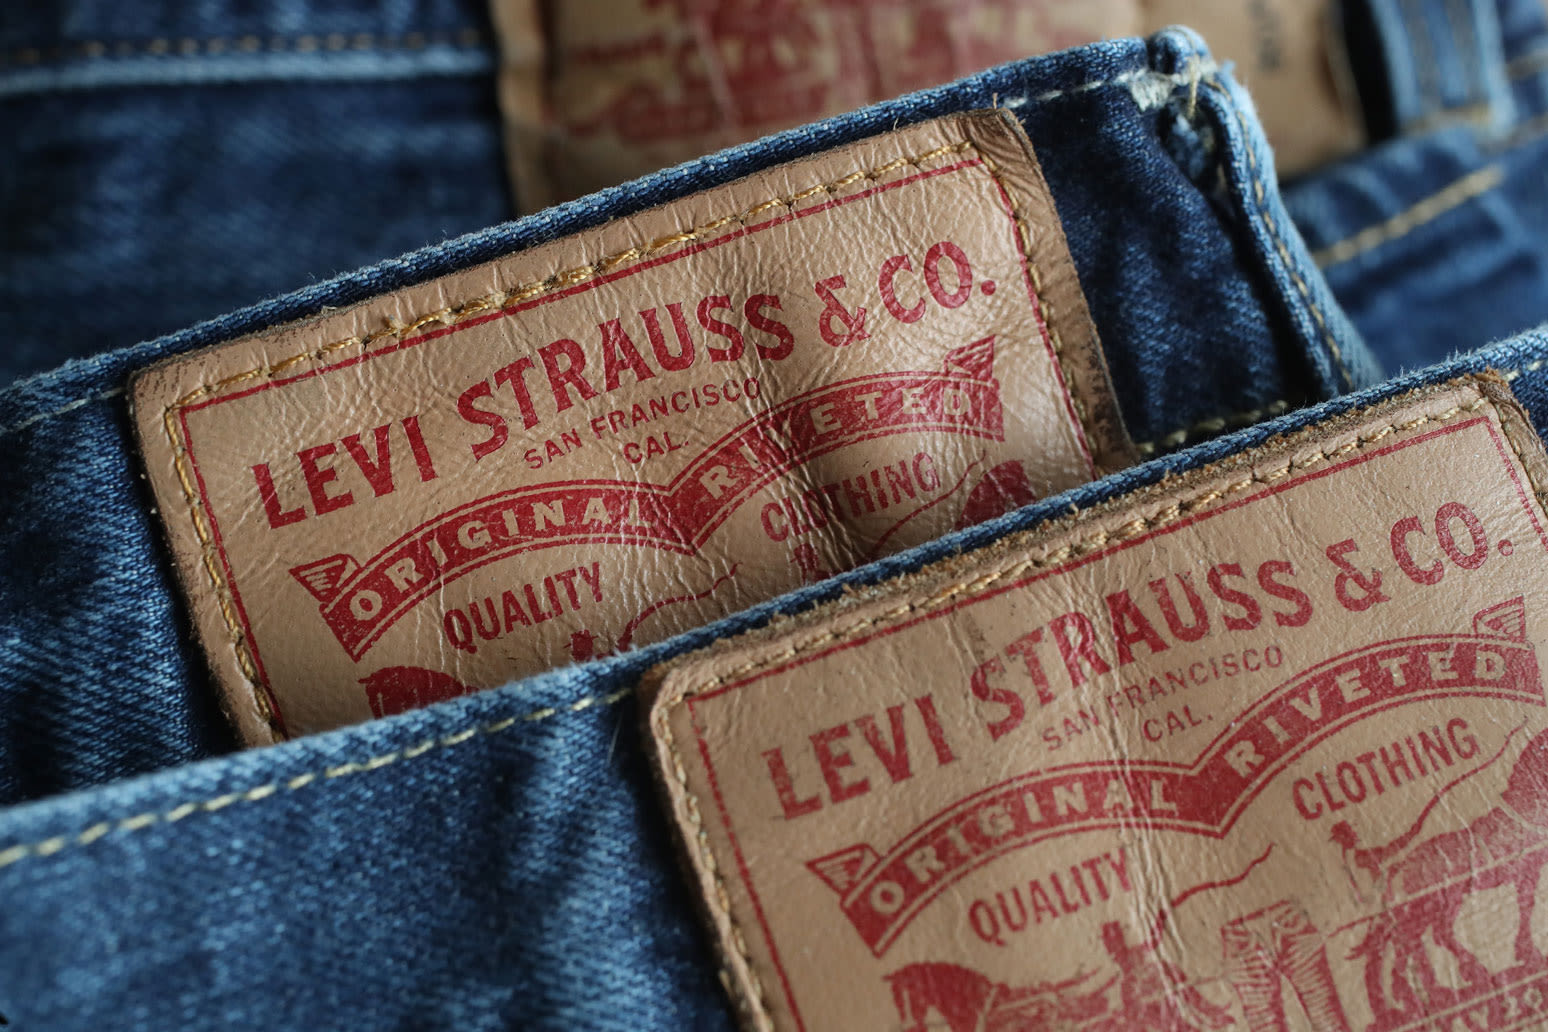 Prime Day Deal: Amazon’s Levi’s Original Shorts Praised as ‘Incredibly Comfortable’ for the Summer—Shop Now